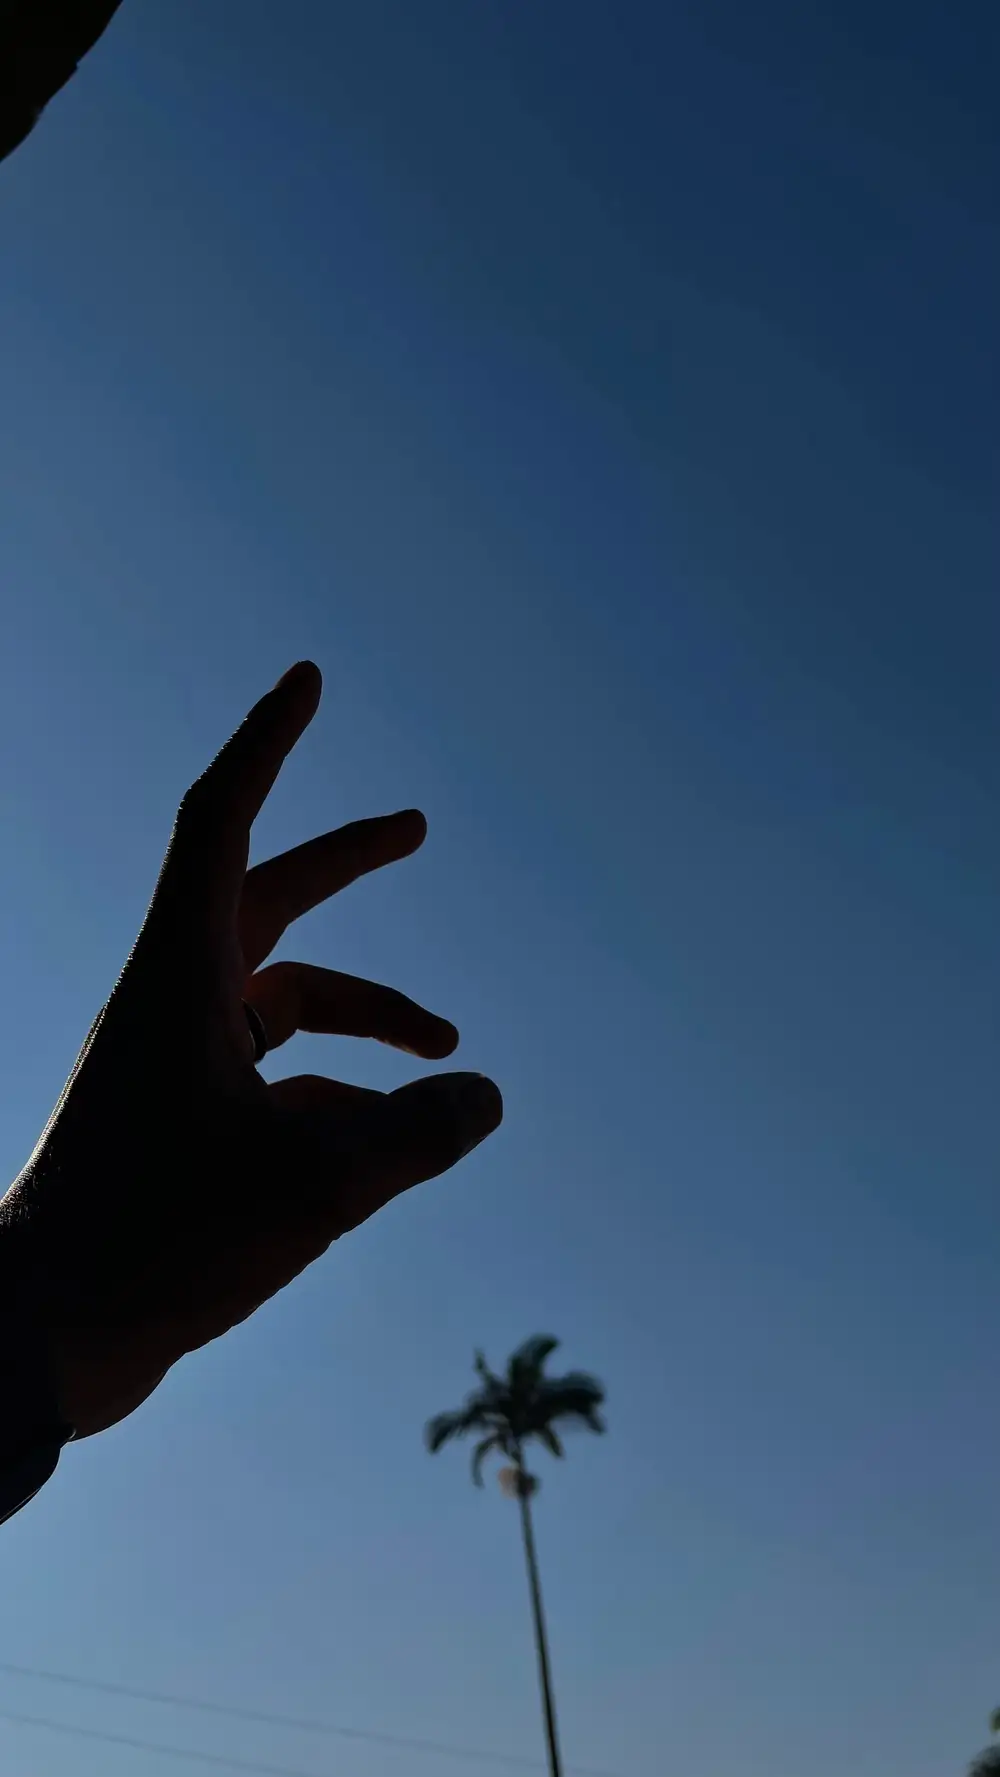 Hands pointing to the sky